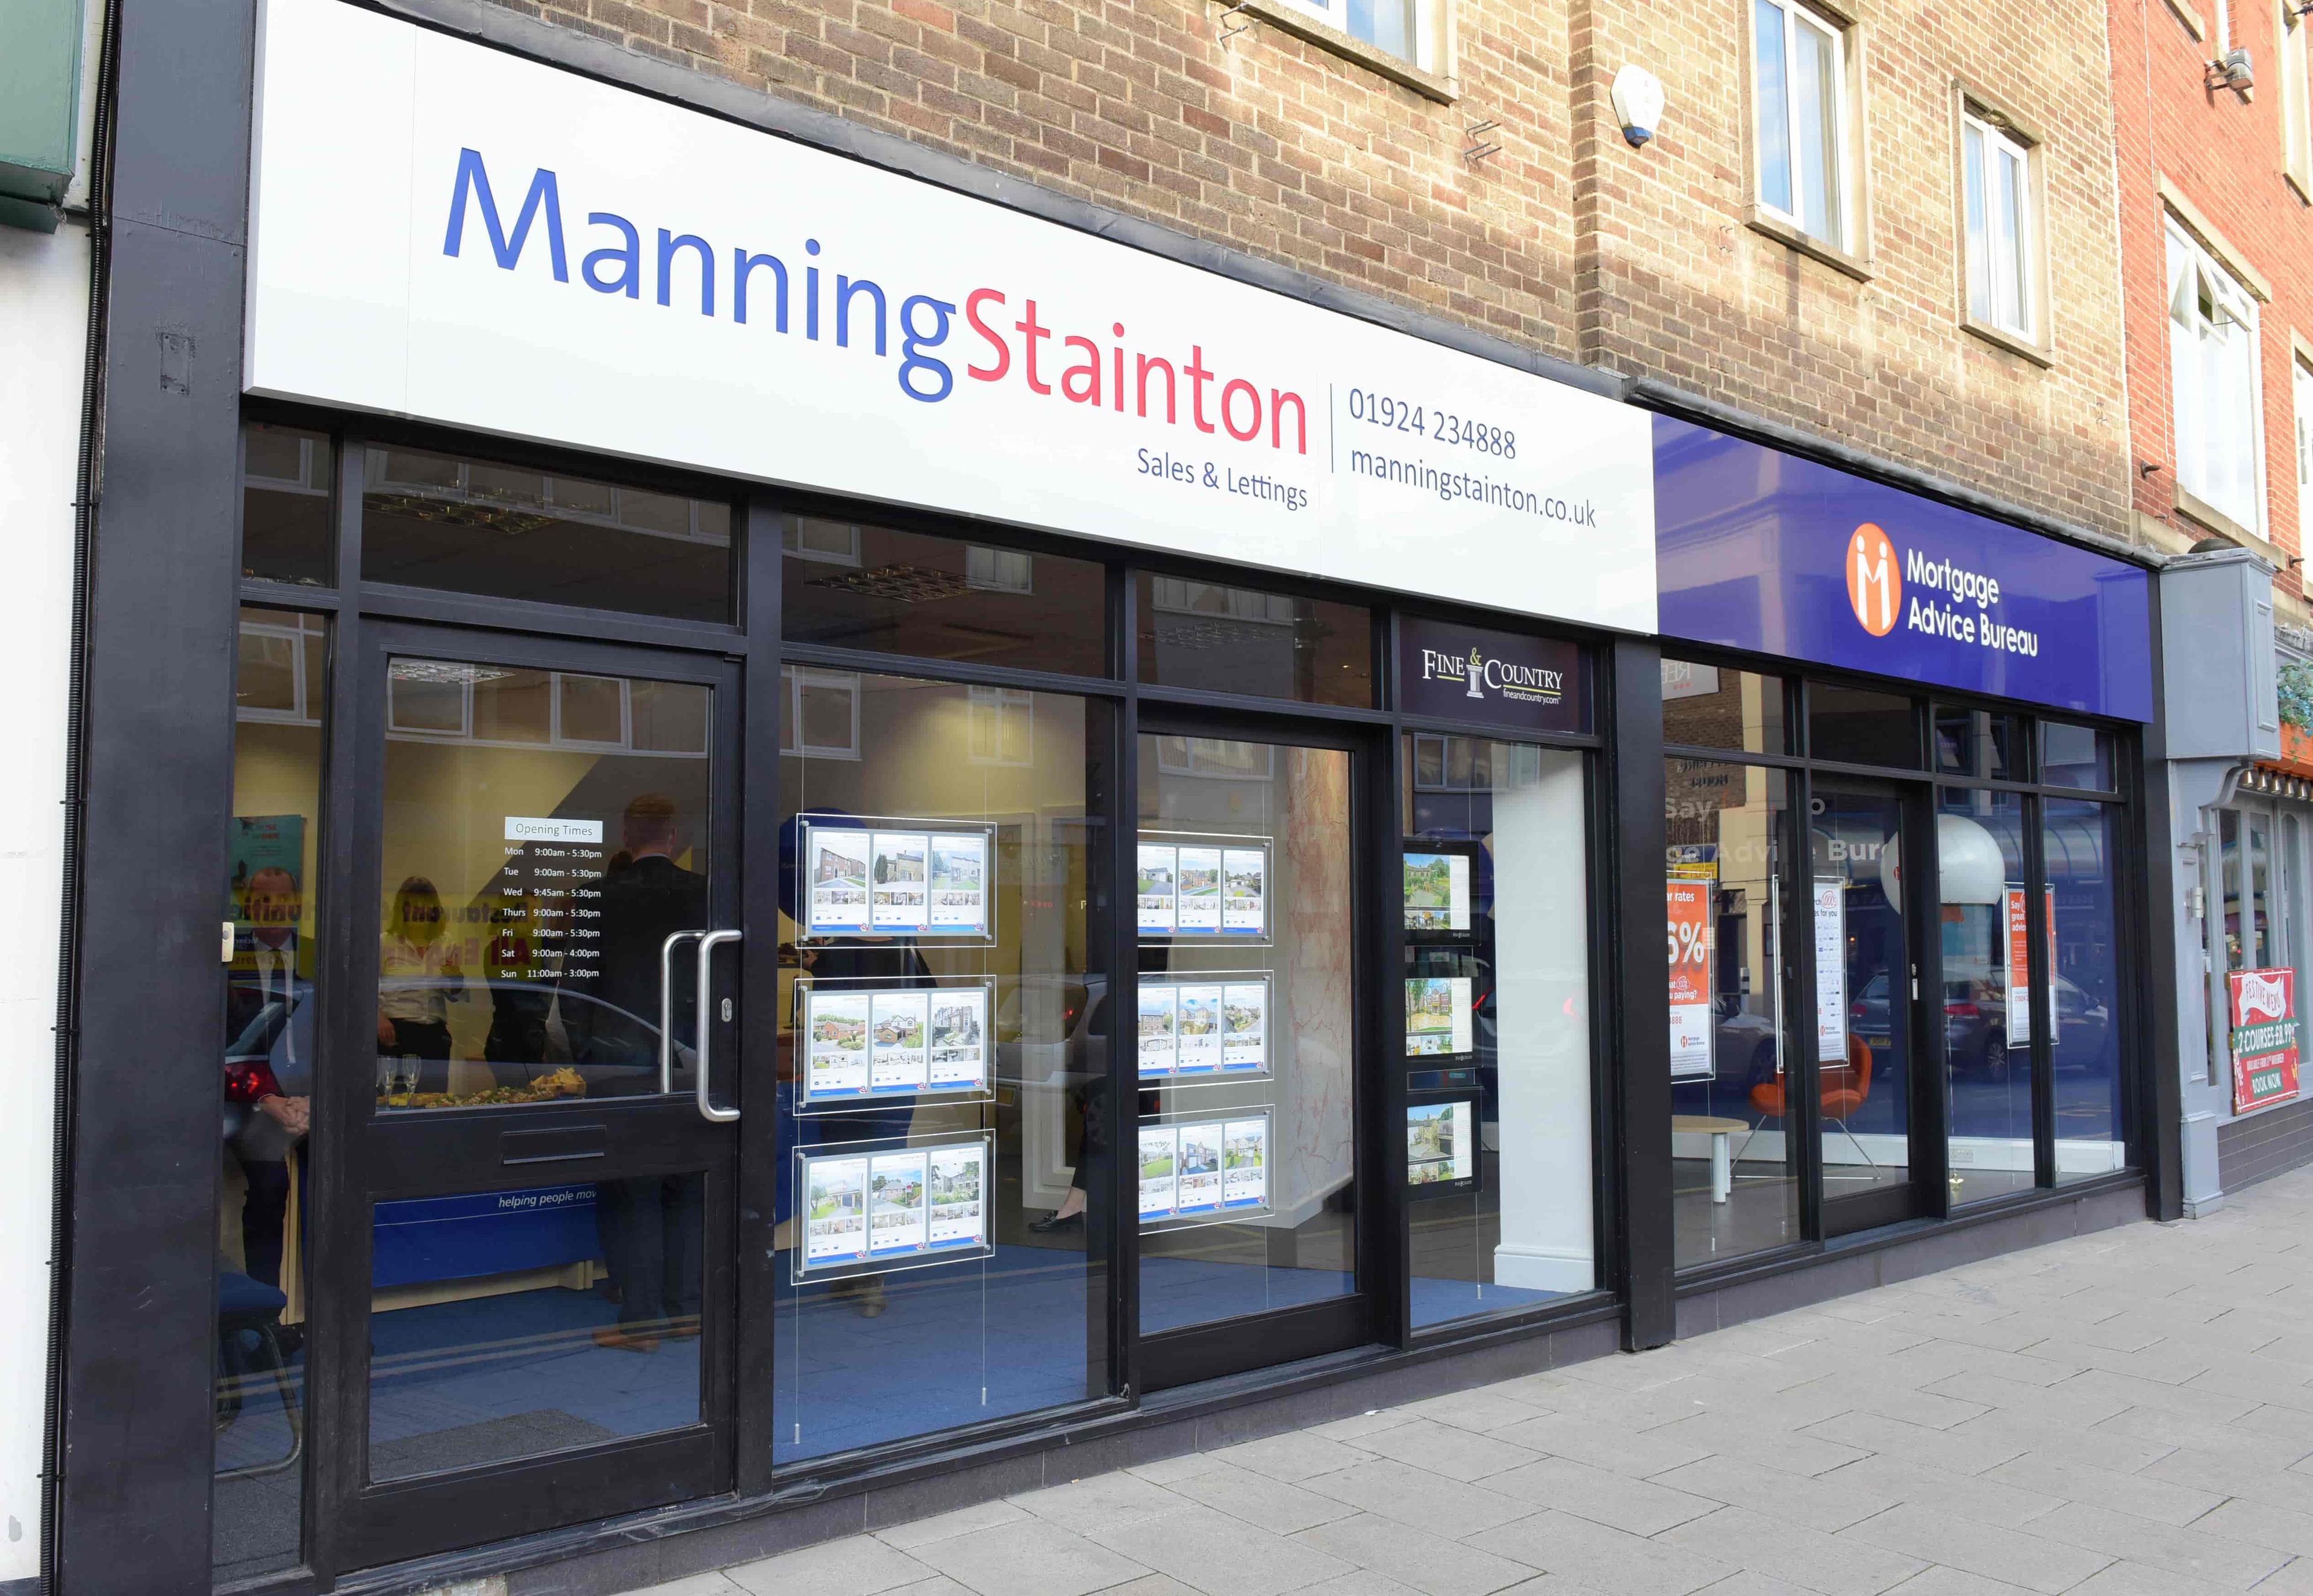 External Image Of Manning Stainton Estate Agents In Leeds Branch